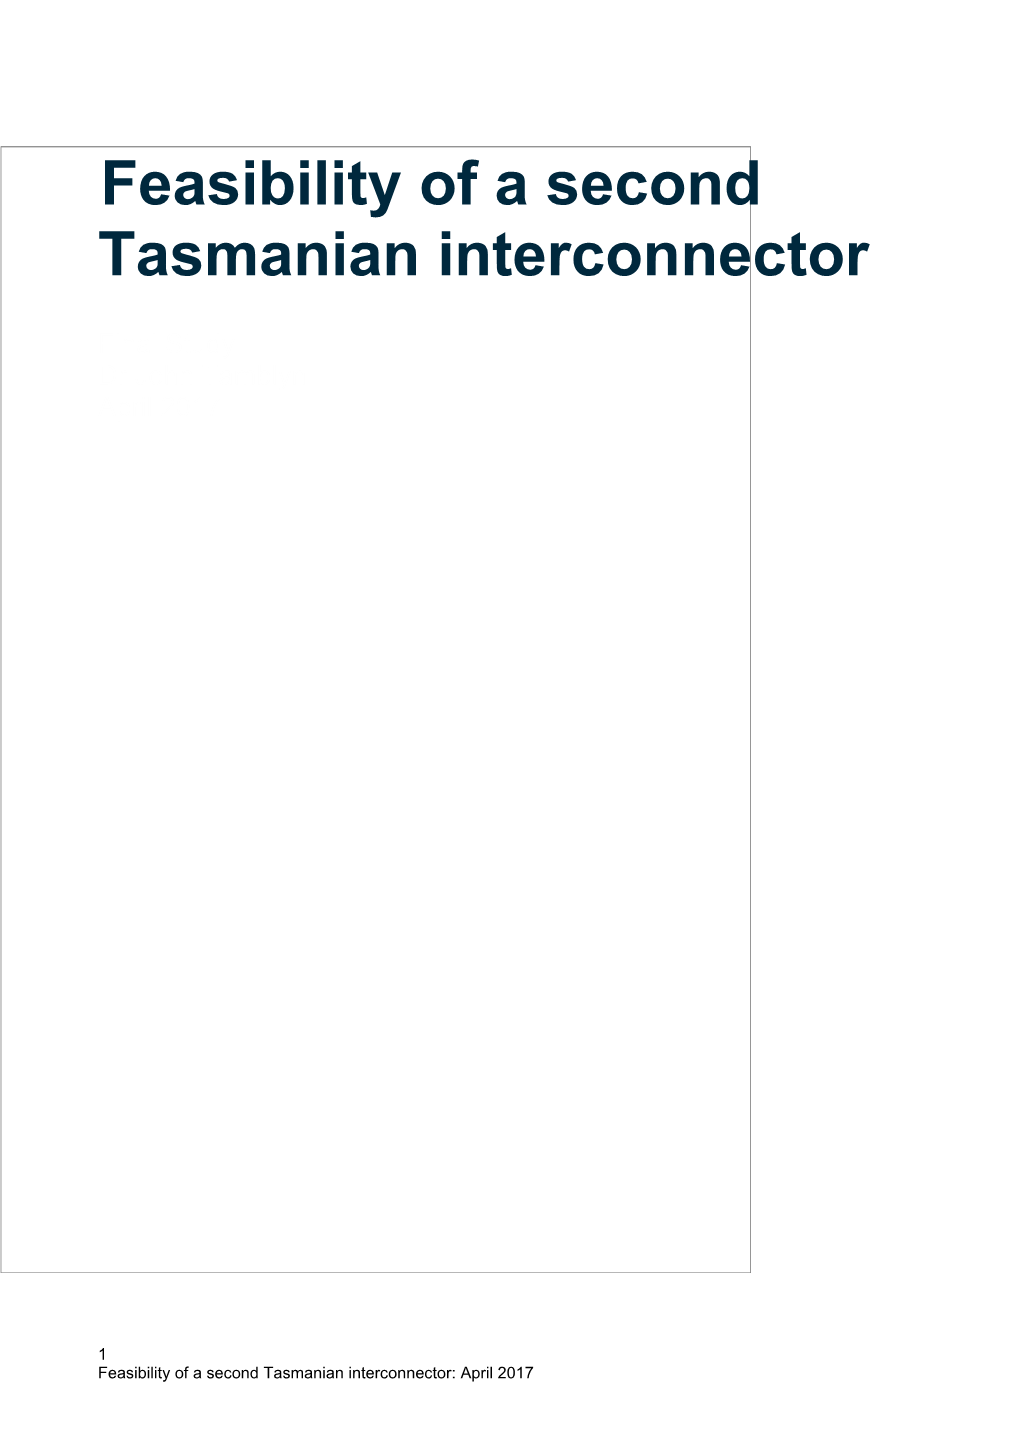 Feasibility of a Second Tasmanian Interconnector